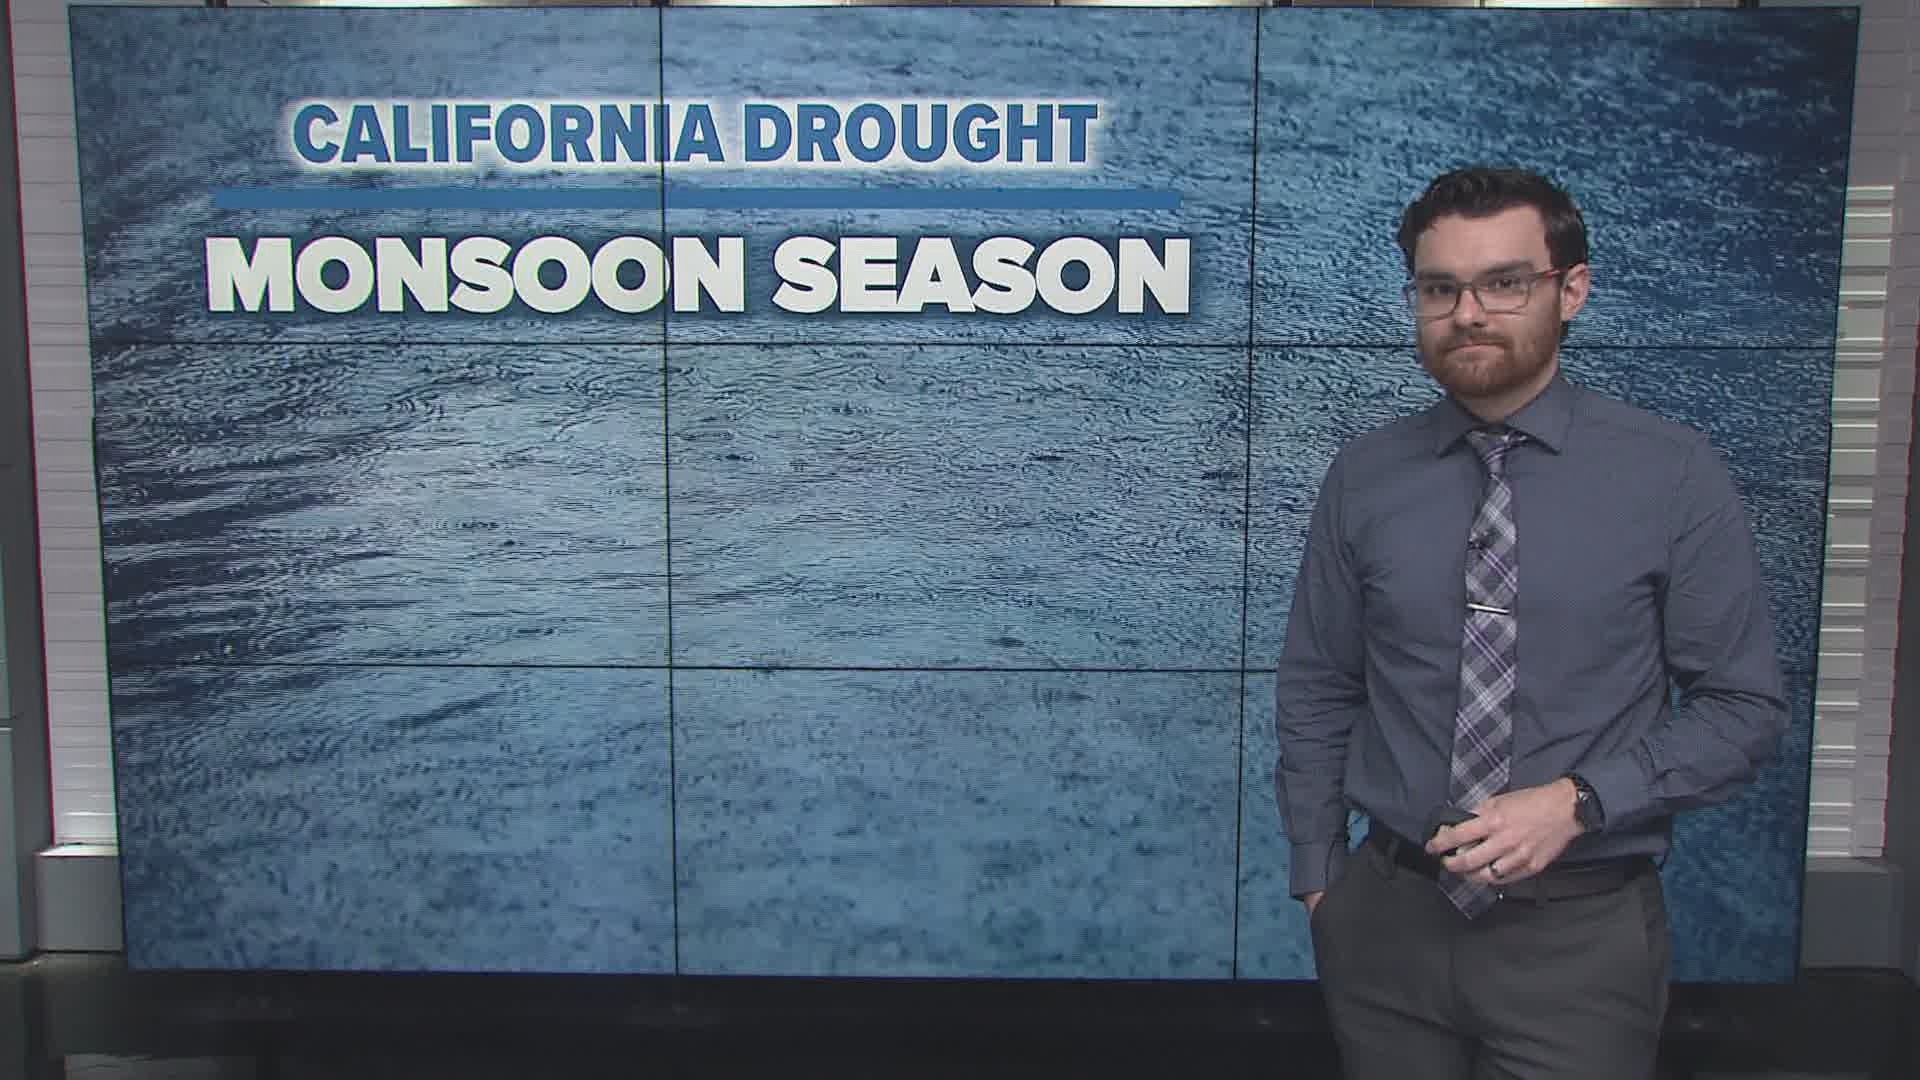 July was brutal for California and the Southwest U.S., and the DWR snow sensors officially read zero. Plus, the monsoon season is off to a very slow start.